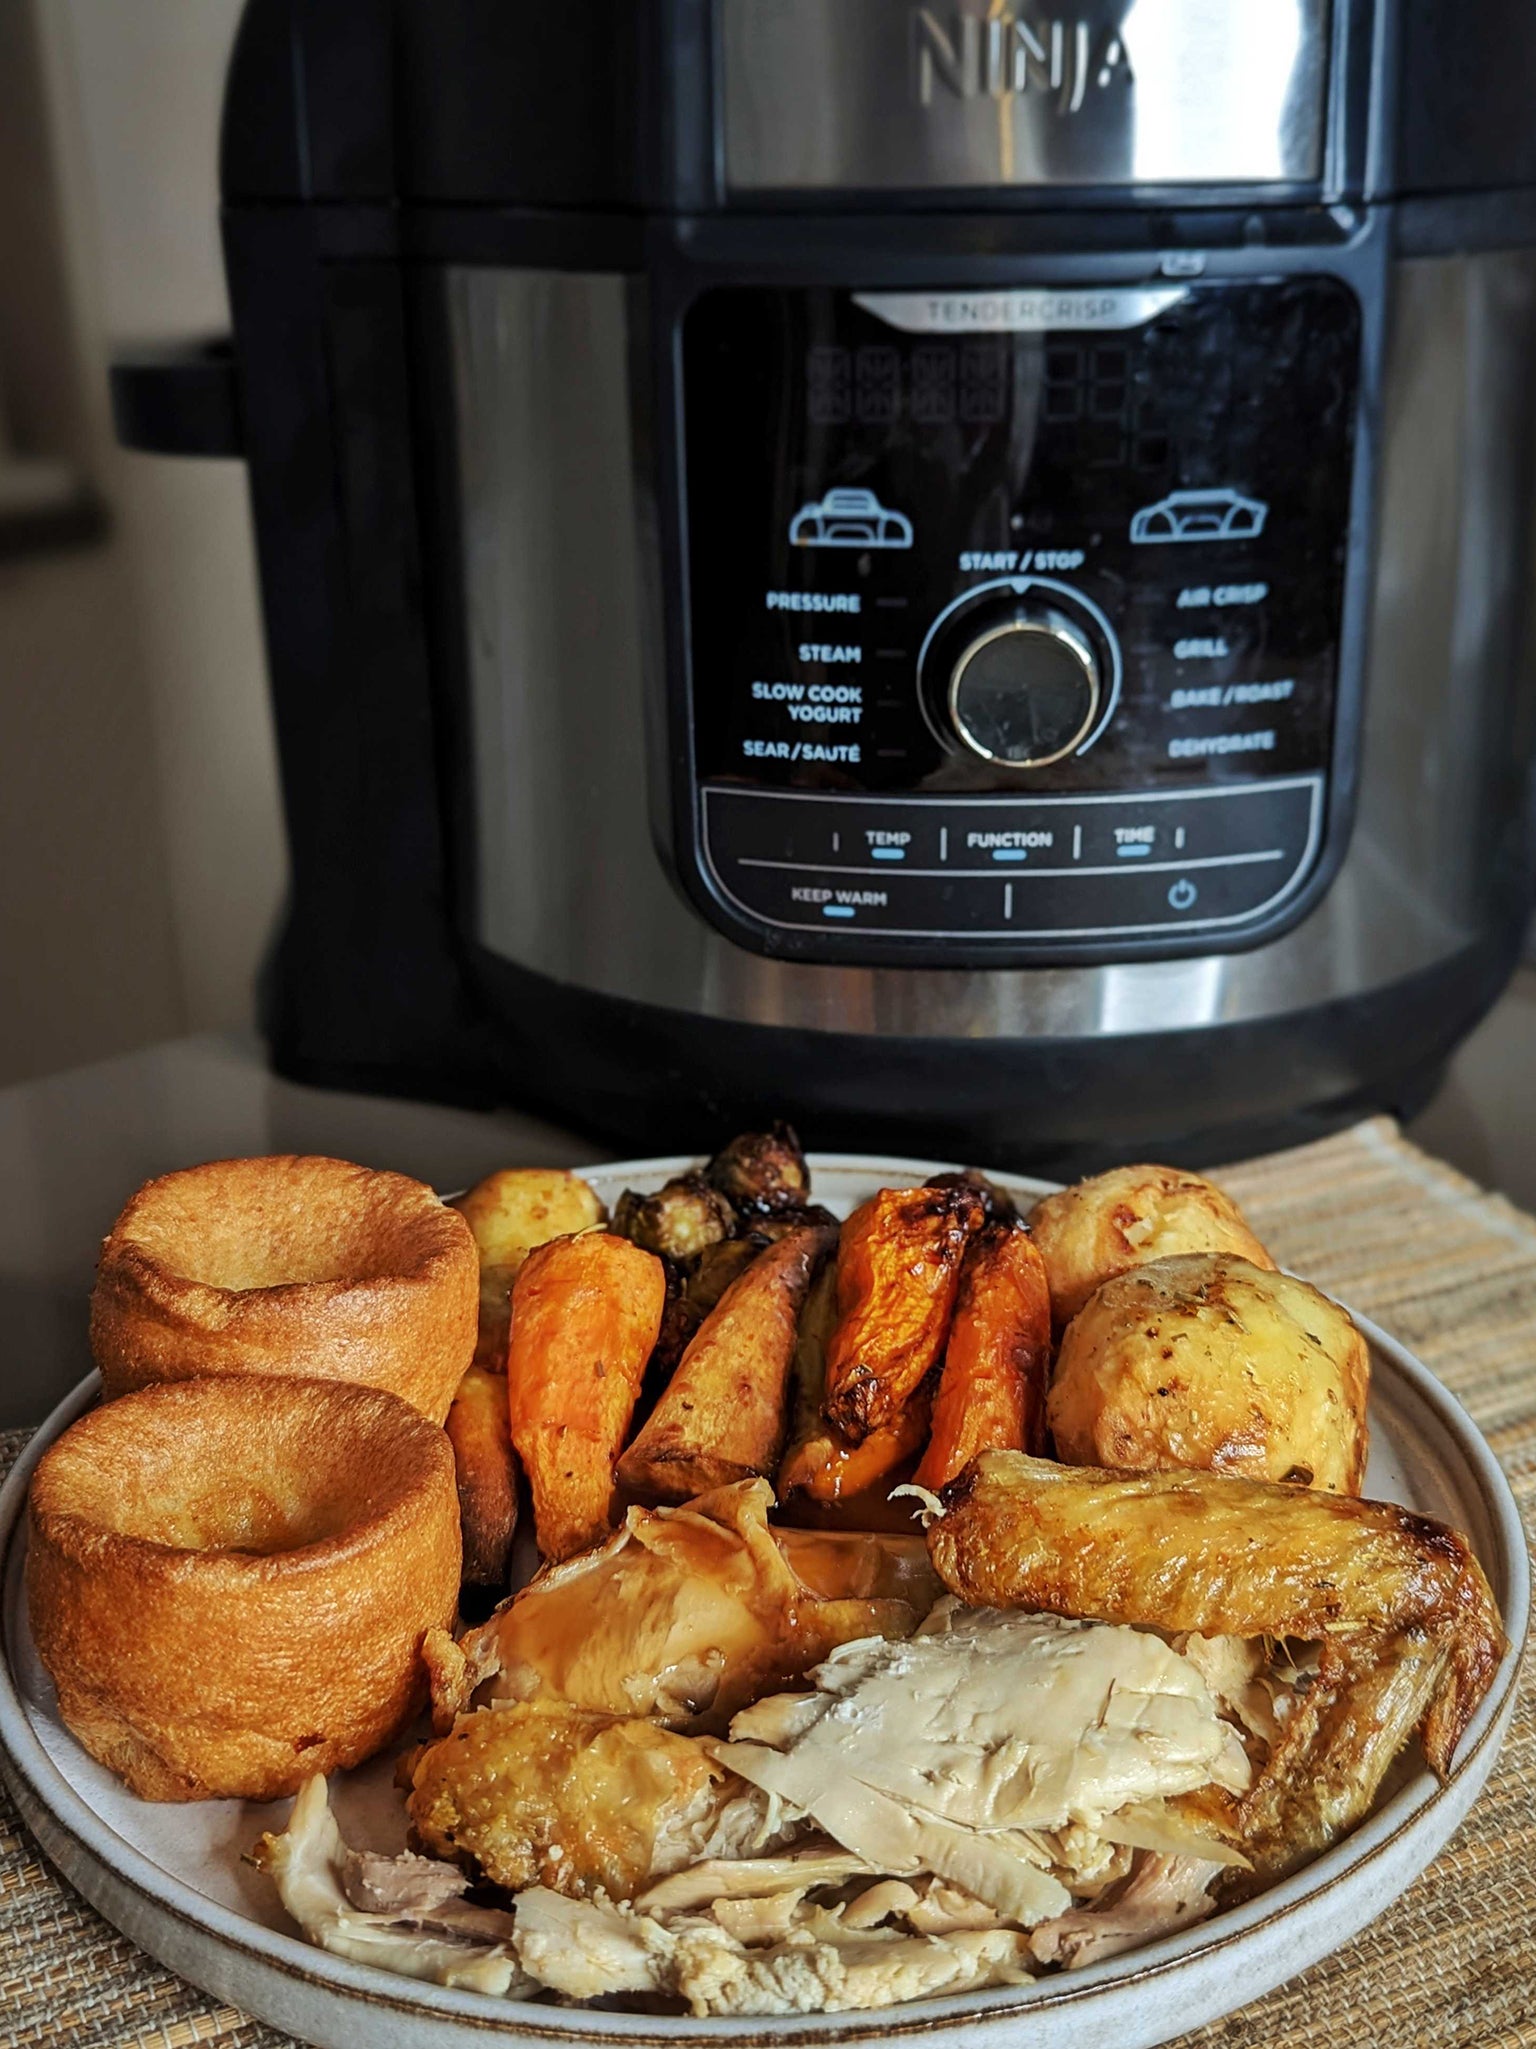 A 6L air fryer can fit a whole chicken and all the trimmings